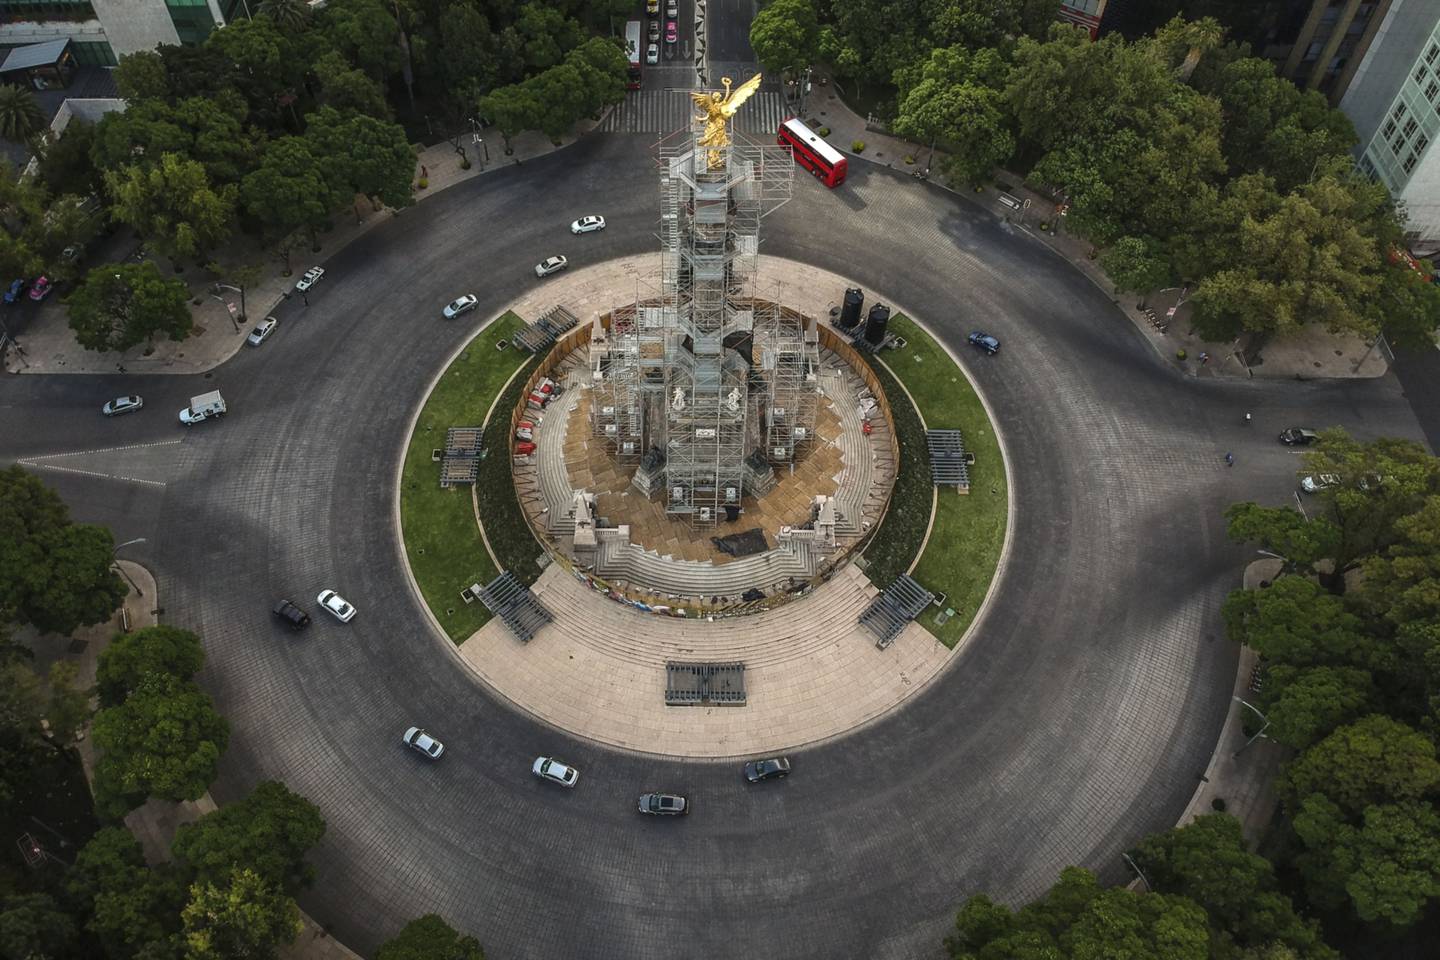 Vehicles travel along a nearly empty Reforma Avenue past the Angel of Independence monument in an aerial photograph taken over Mexico City.